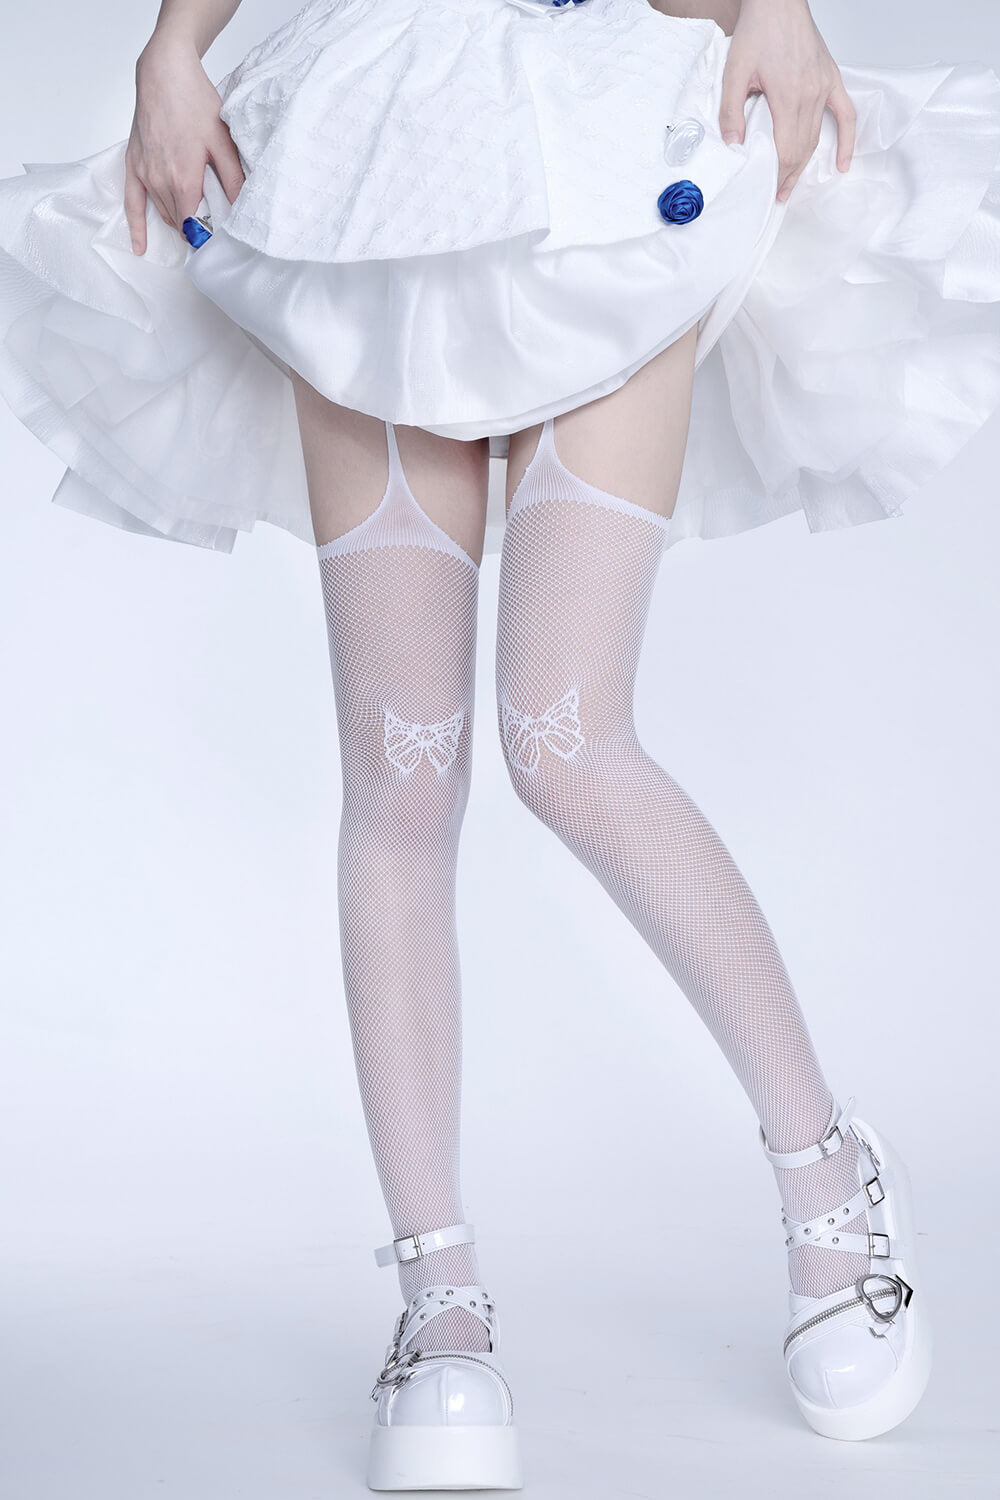 bow-pattern-fishnet-tights-thigh-high-suspender-pantyhose-in-white